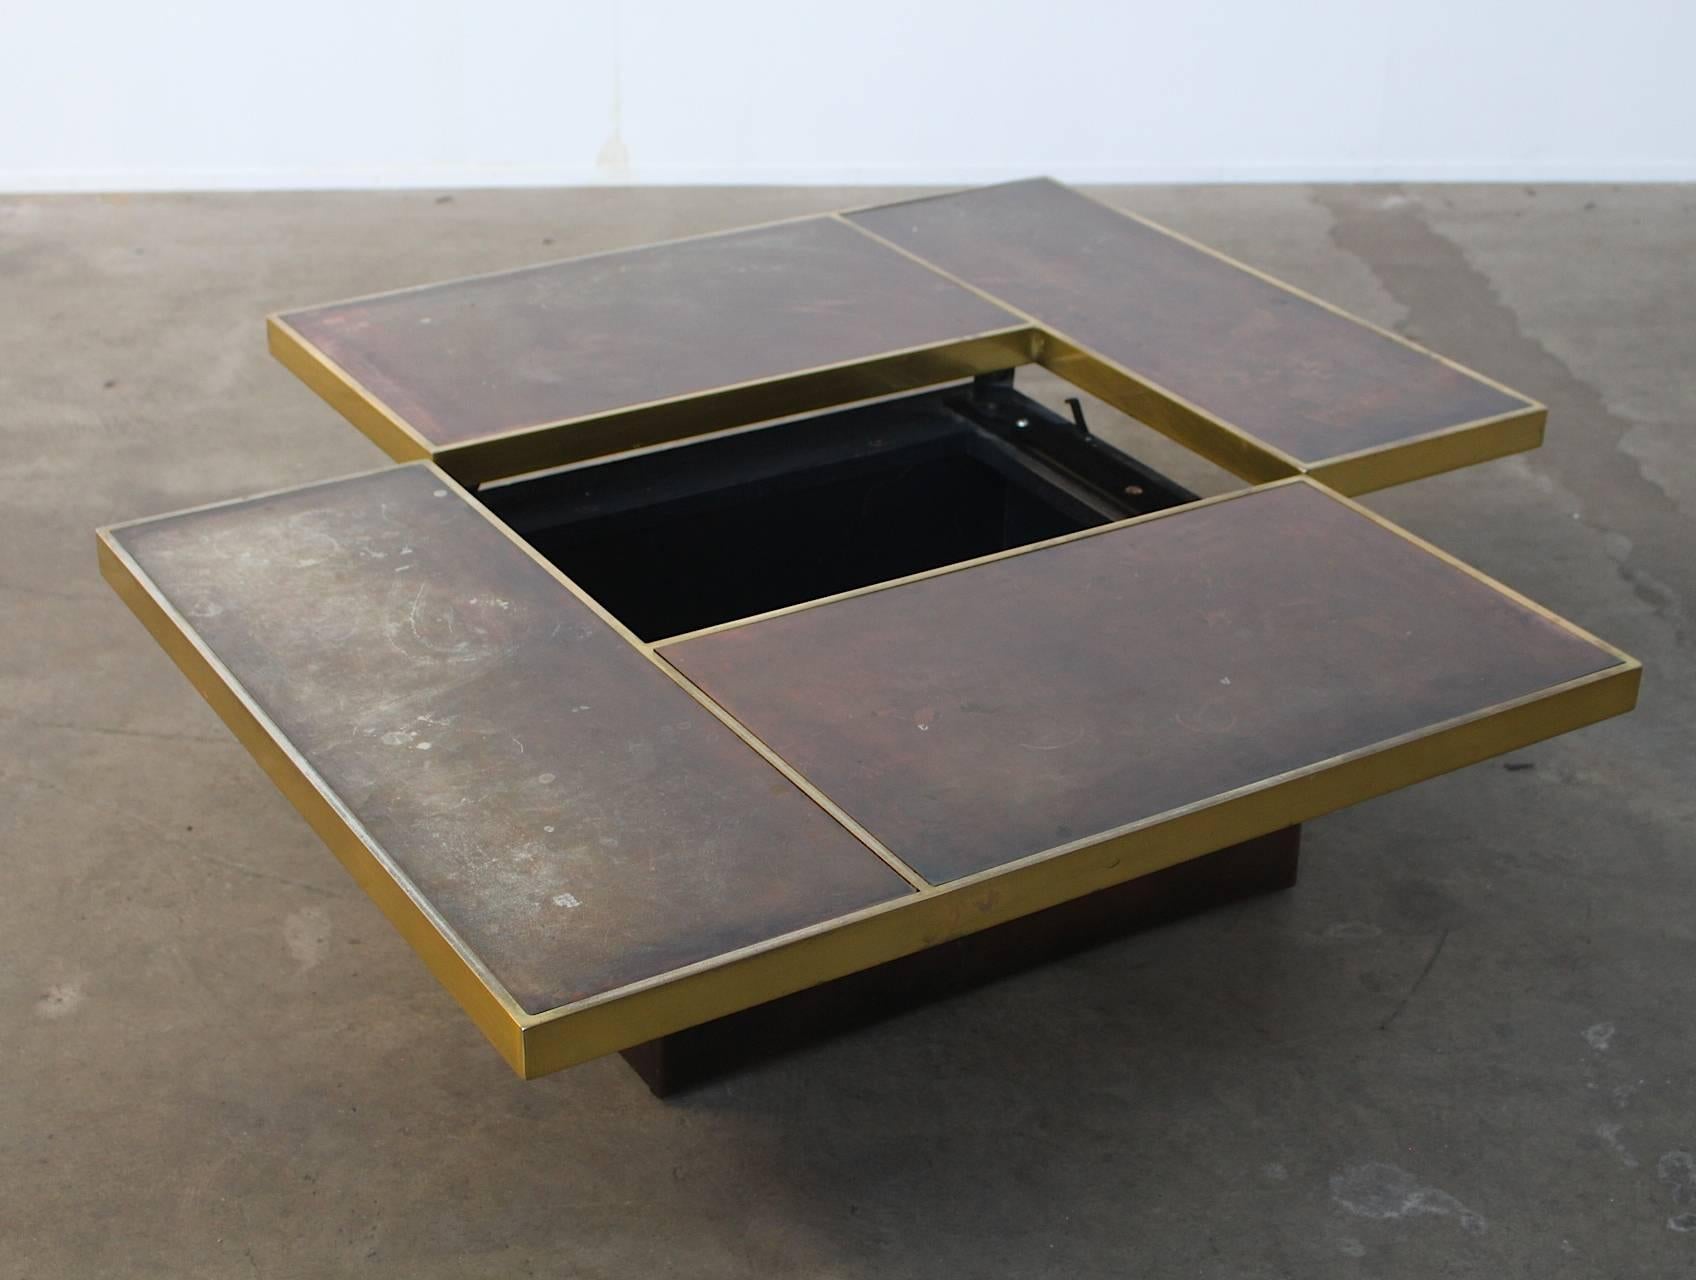 Stunning geometric Italian cocktail table, 1970’s. 
Brass framing and red etched copper top and base. The top can slide open and hides a mirrored bar. This chique eye-catching coffee table with incorporated dry bar fits perfectly in a Willy Rizzo